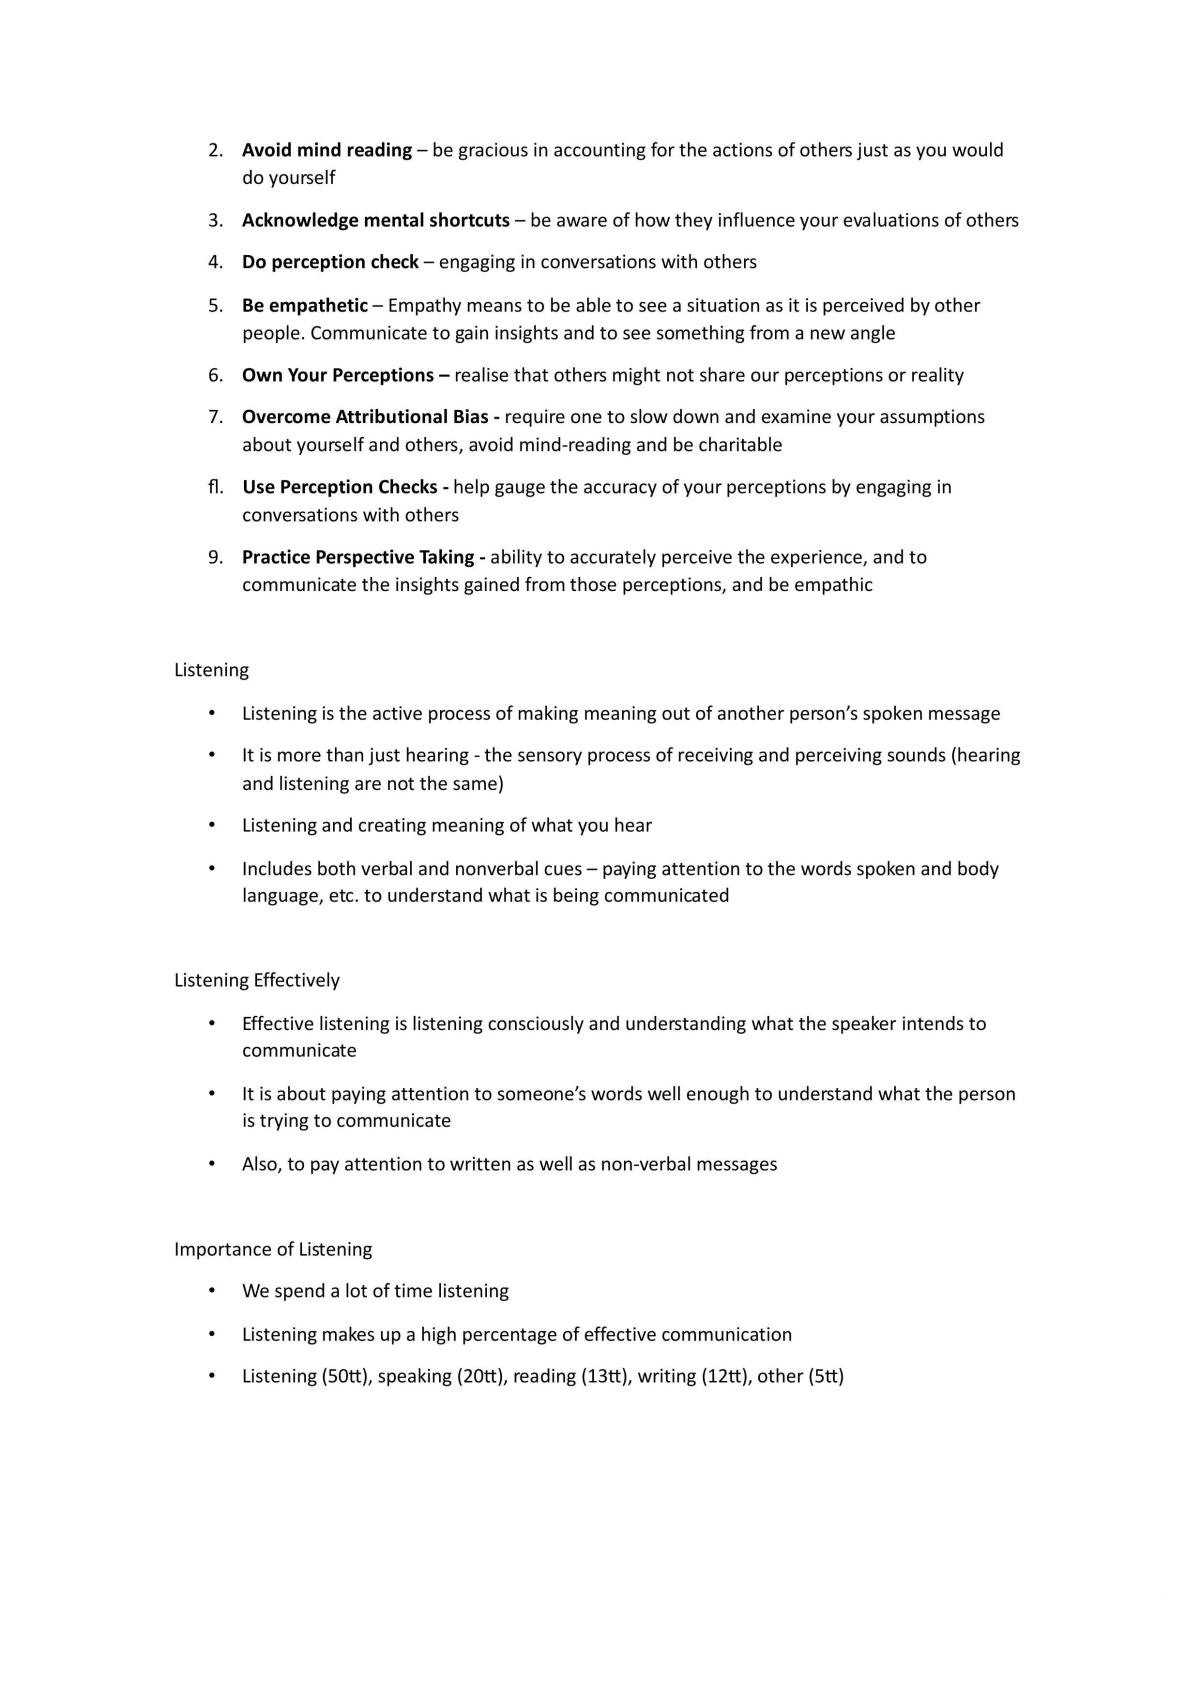 Principles and Practice of Communication Course Notes - Page 11